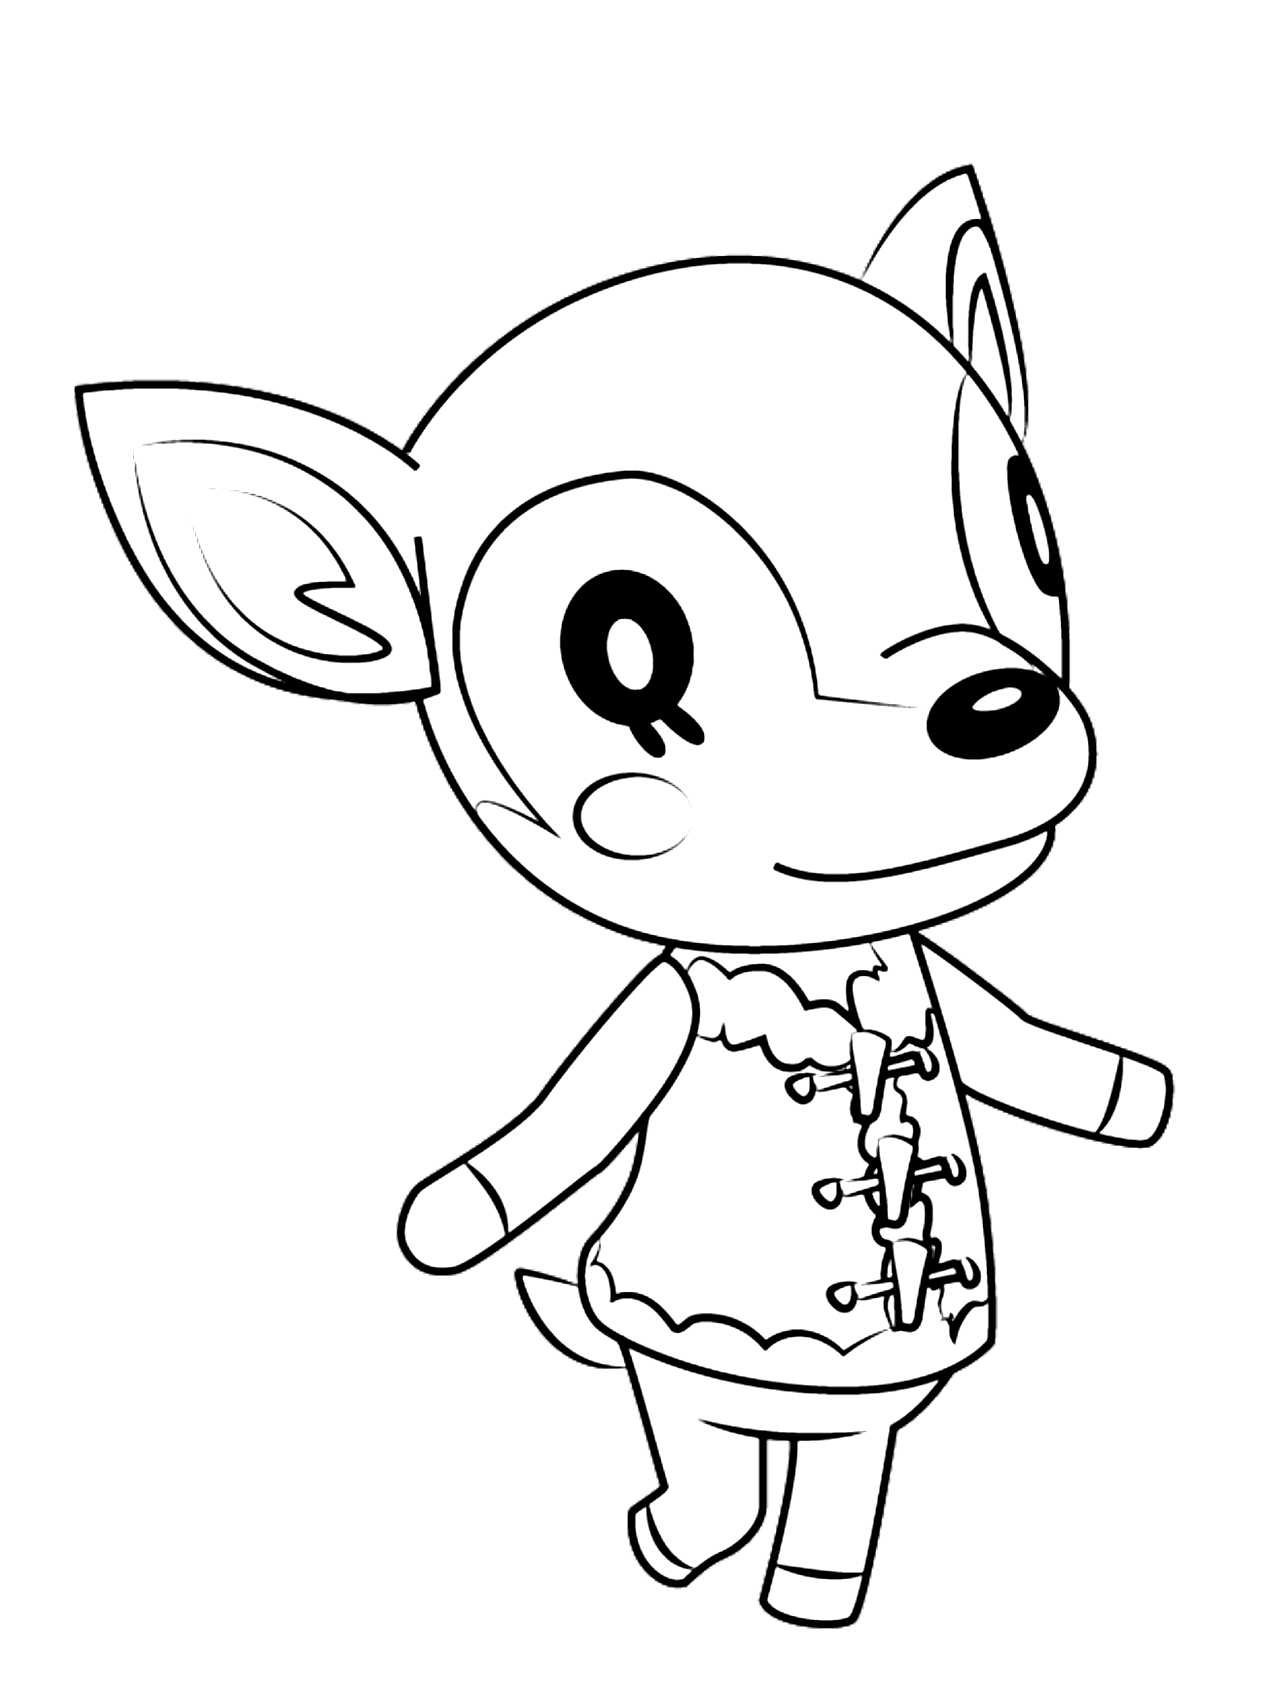 Cute Animal Crossing New Horizons Coloring Pages Pdf - Printable Animal Crossing New Horizons Coloring Pages